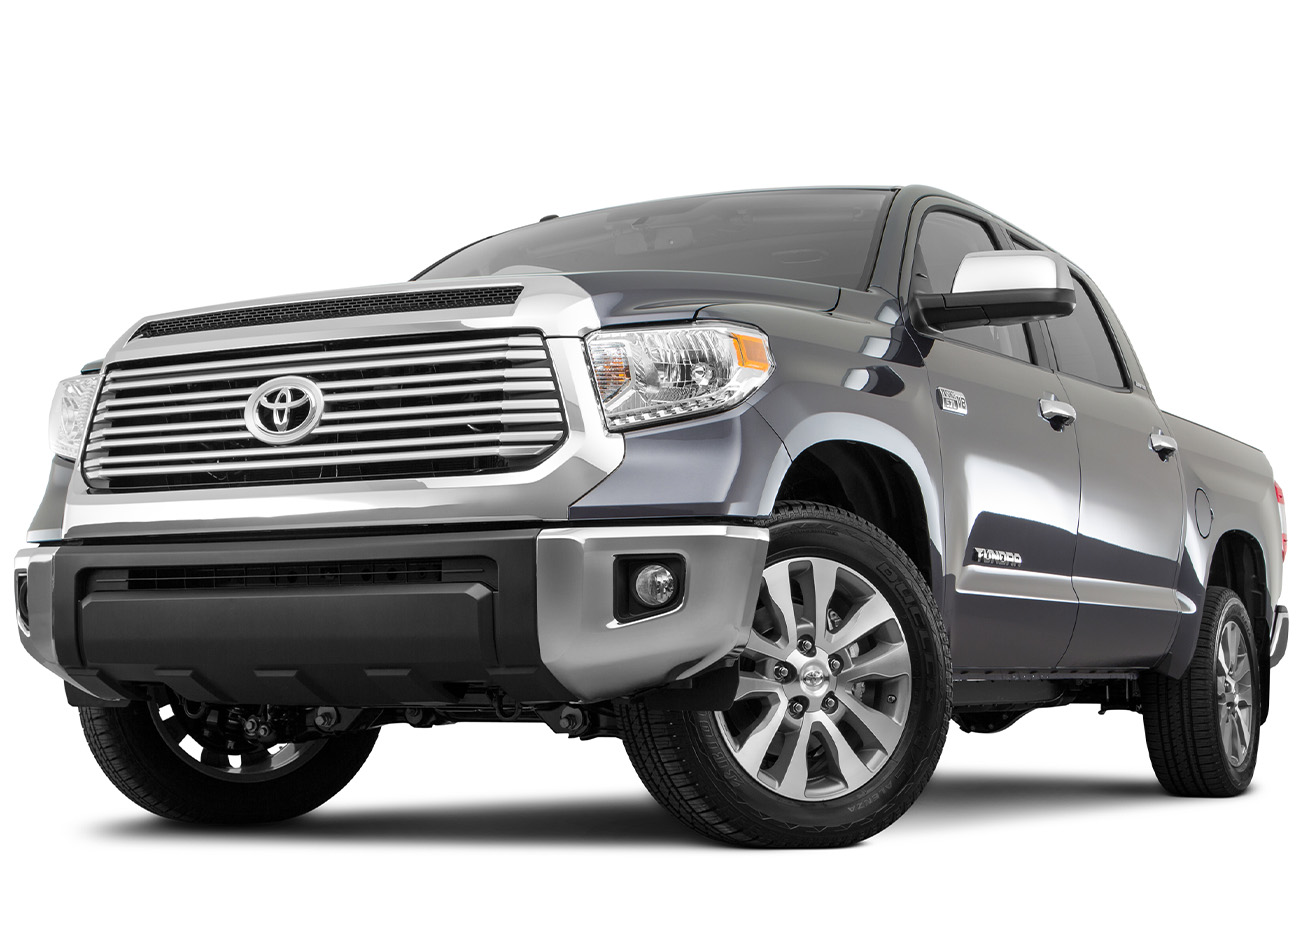 2016 Toyota Tundra Research, photos, specs, and expertise | CarMax